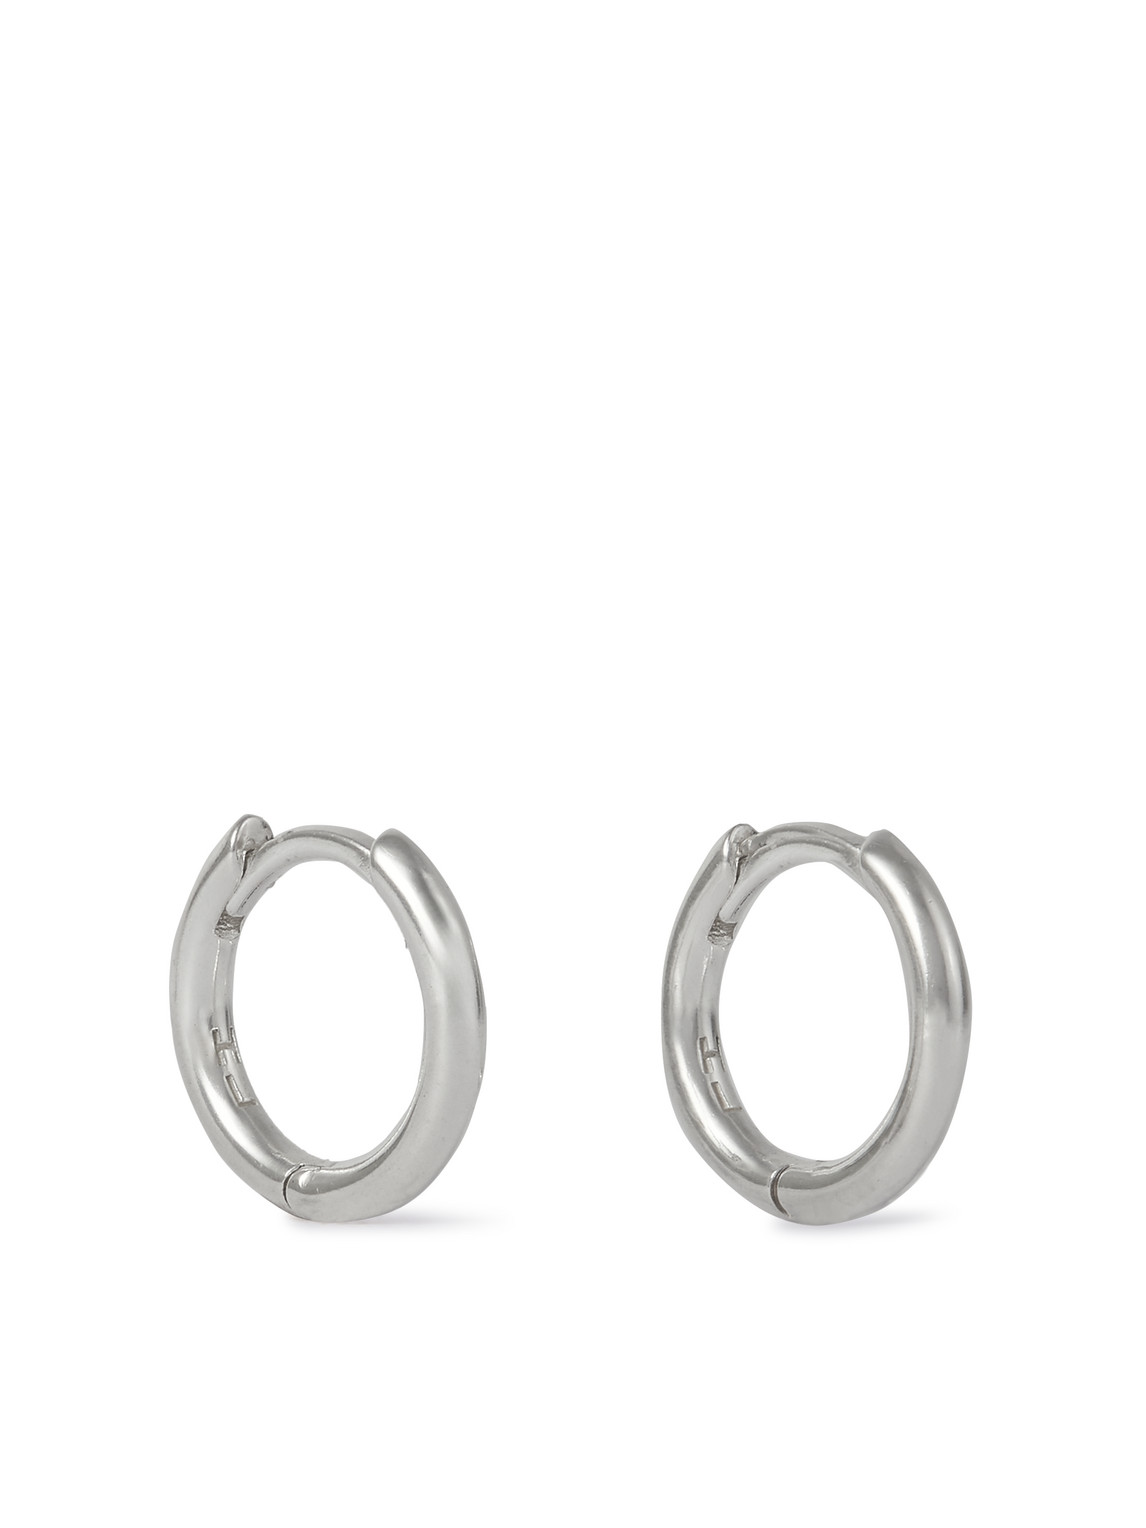 Hatton Labs Small Round Silver Hoop Earrings